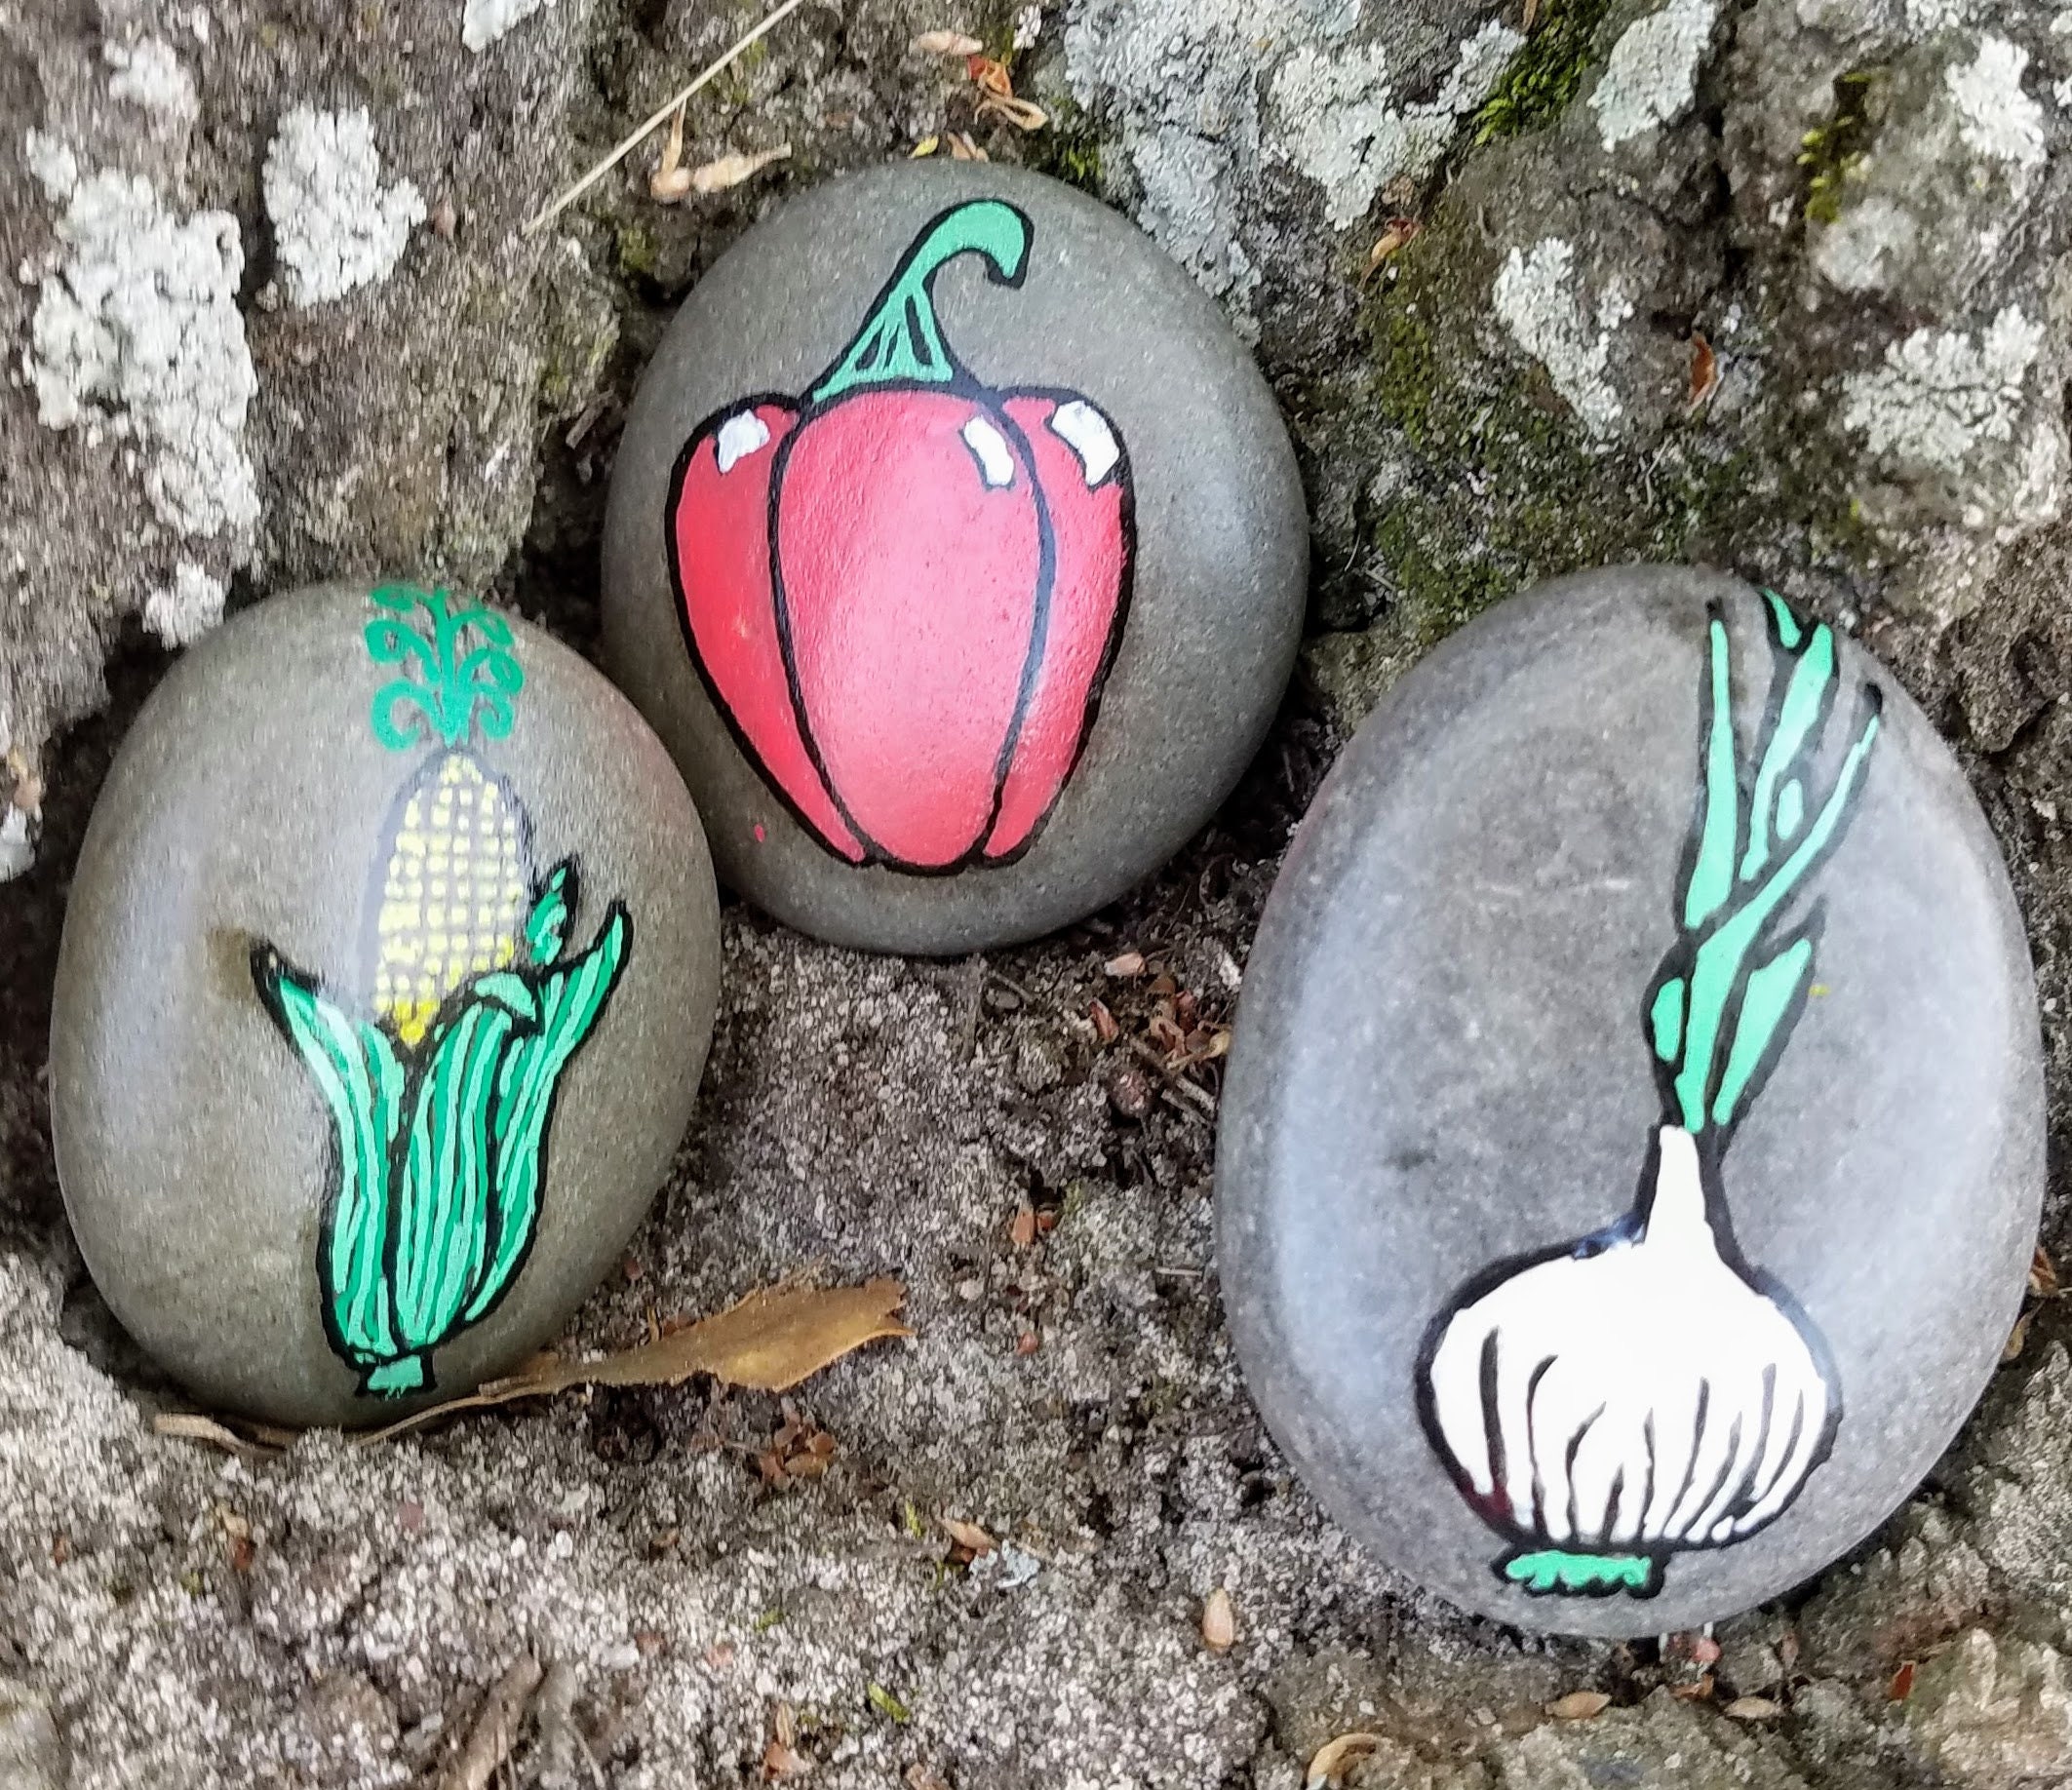 How to Make Garden Markers by Painting Stones